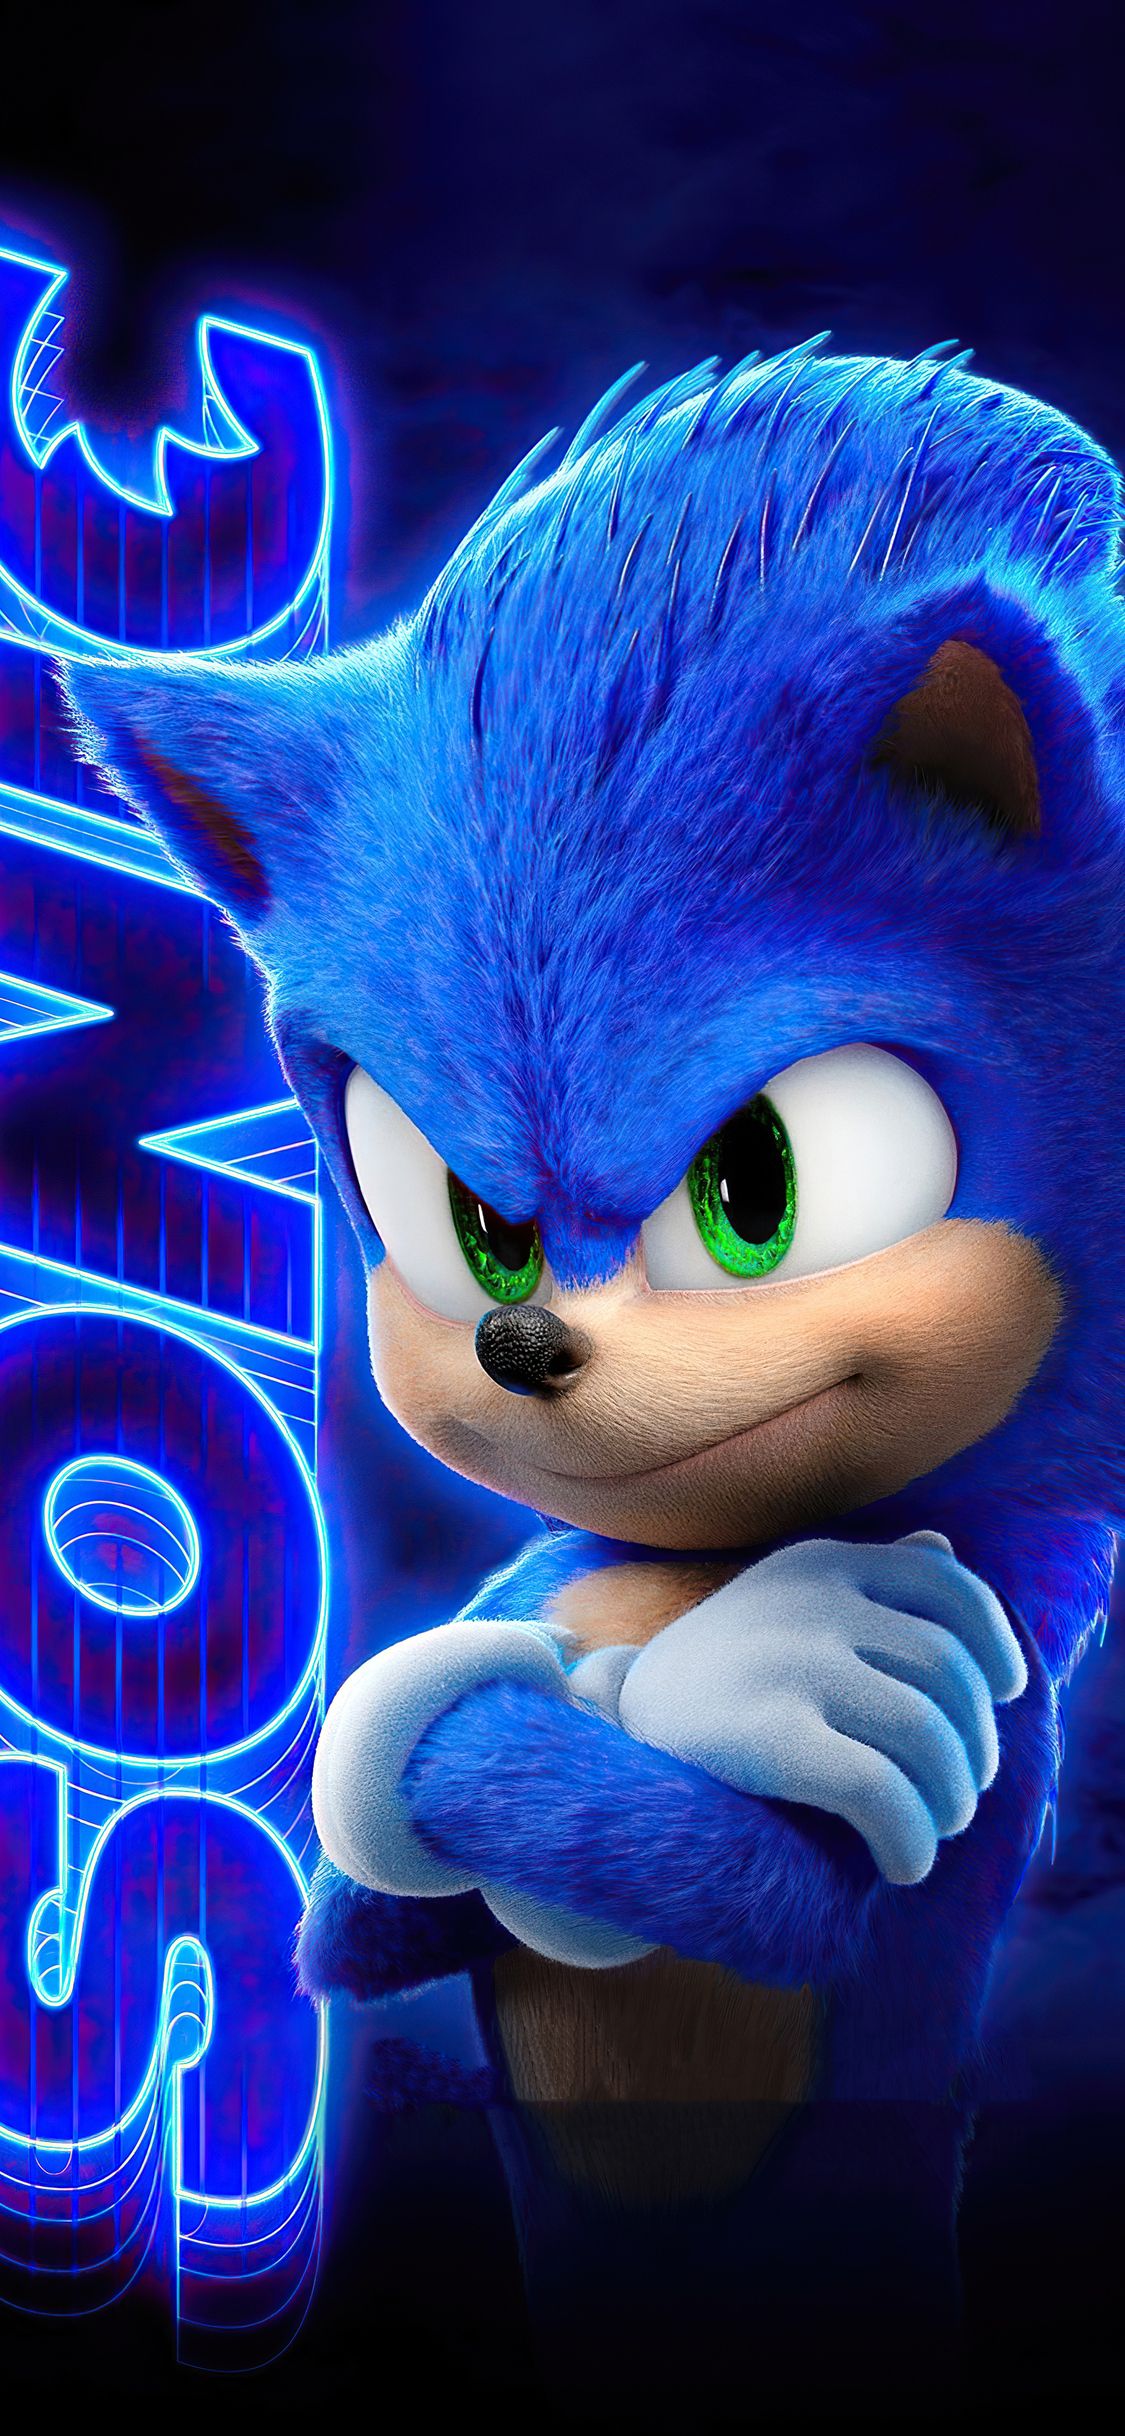 Sonic The Hedgehog2020 iPhone XS, iPhone iPhone X HD 4k Wallpaper, Image, Background, Photo and Picture